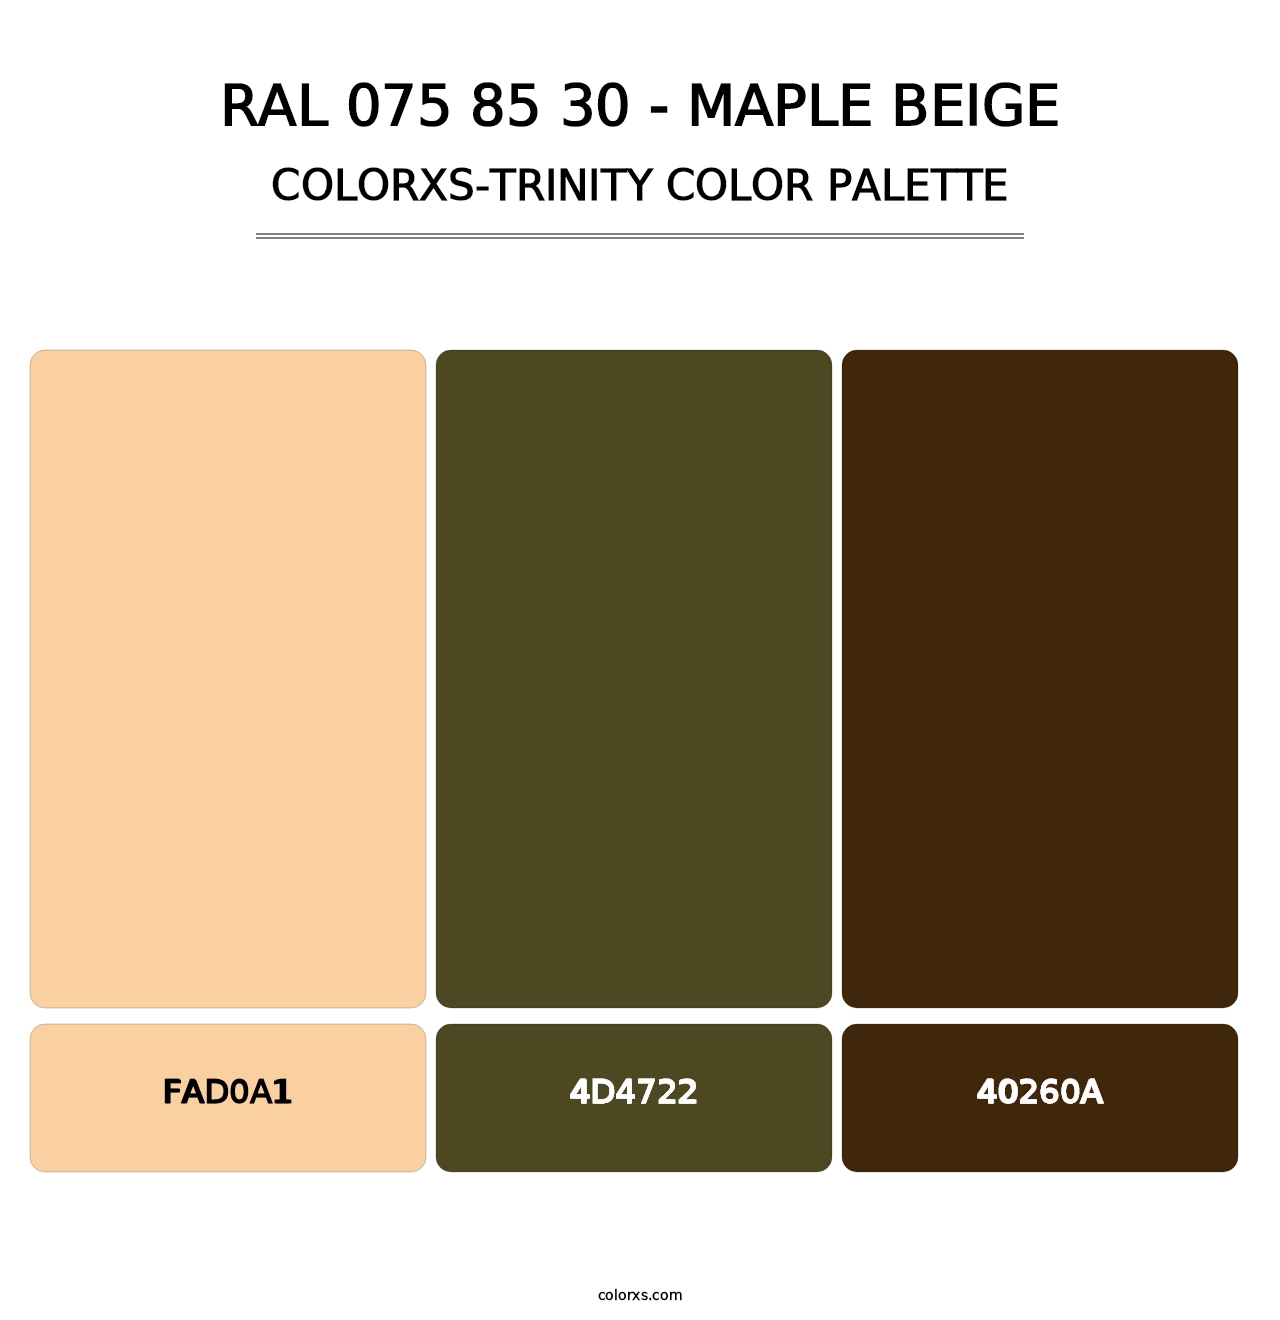 RAL 075 85 30 - Maple Beige - Colorxs Trinity Palette